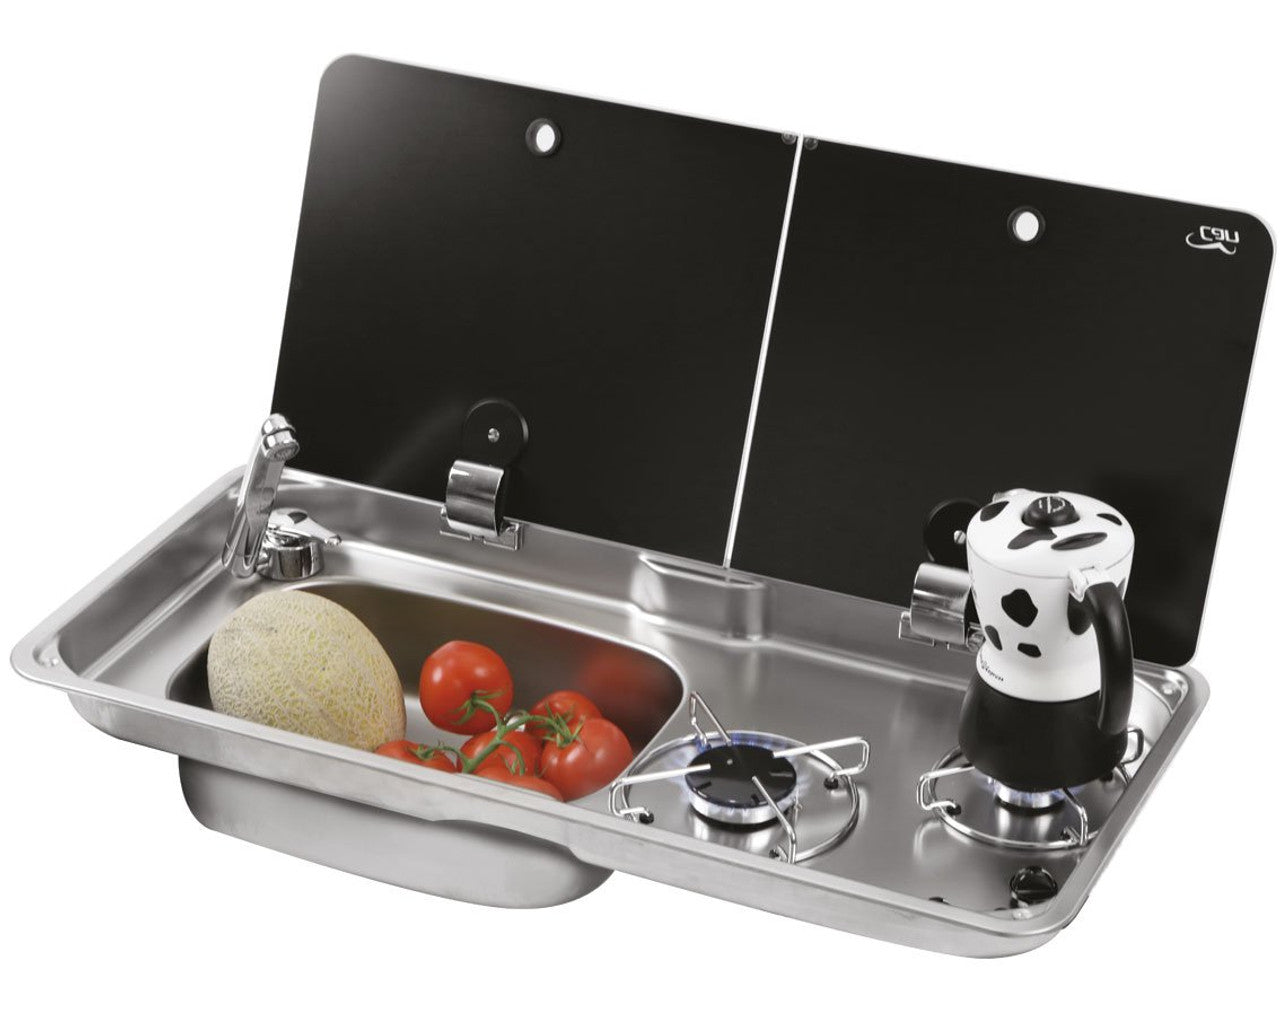 Tailored Kitchen Solutions: Your Choice of CCCAMPERS' Customisable Cooking and Sink Options